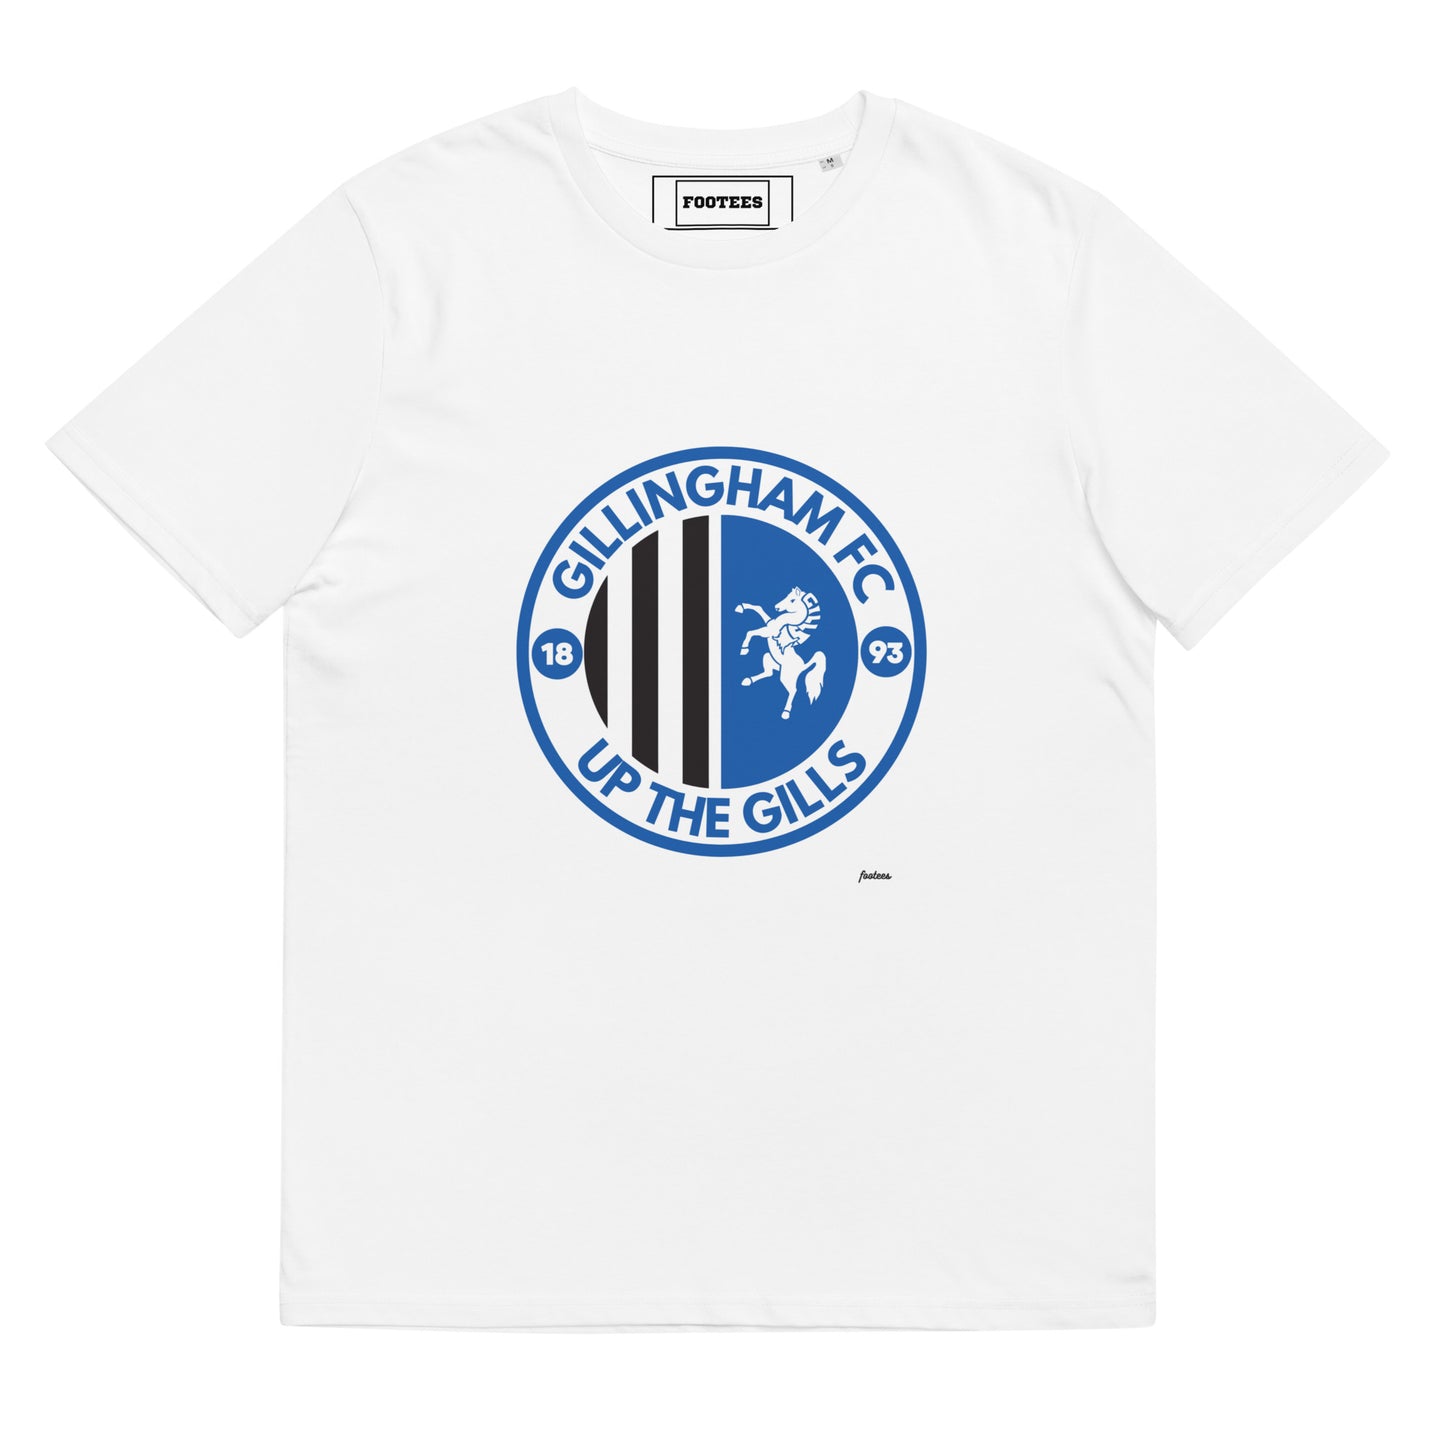 Up the Gills Tee